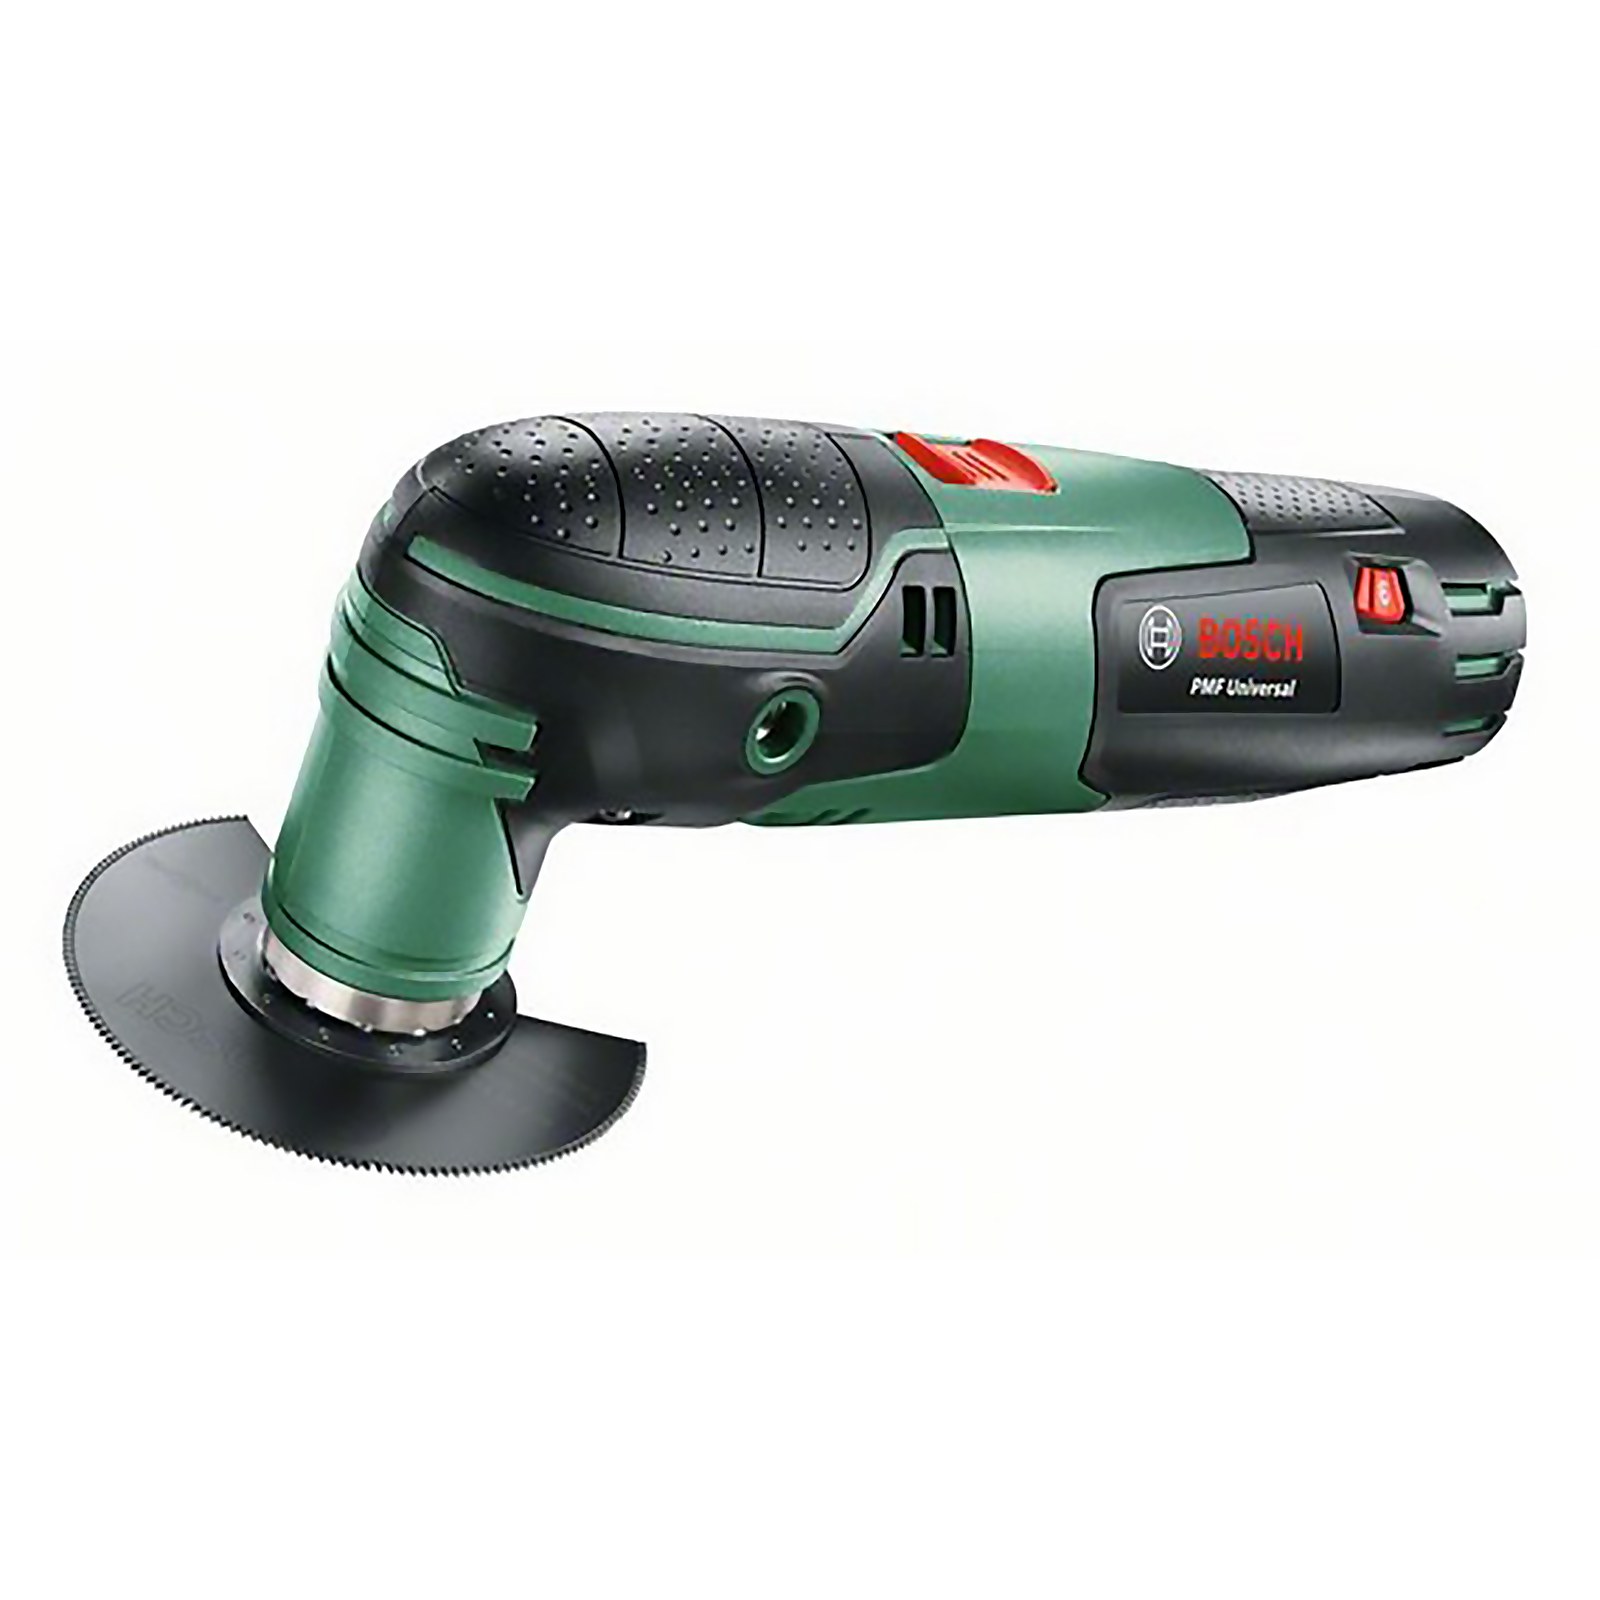 Photo of Bosch Pmf 220 Ce Corded Multitool